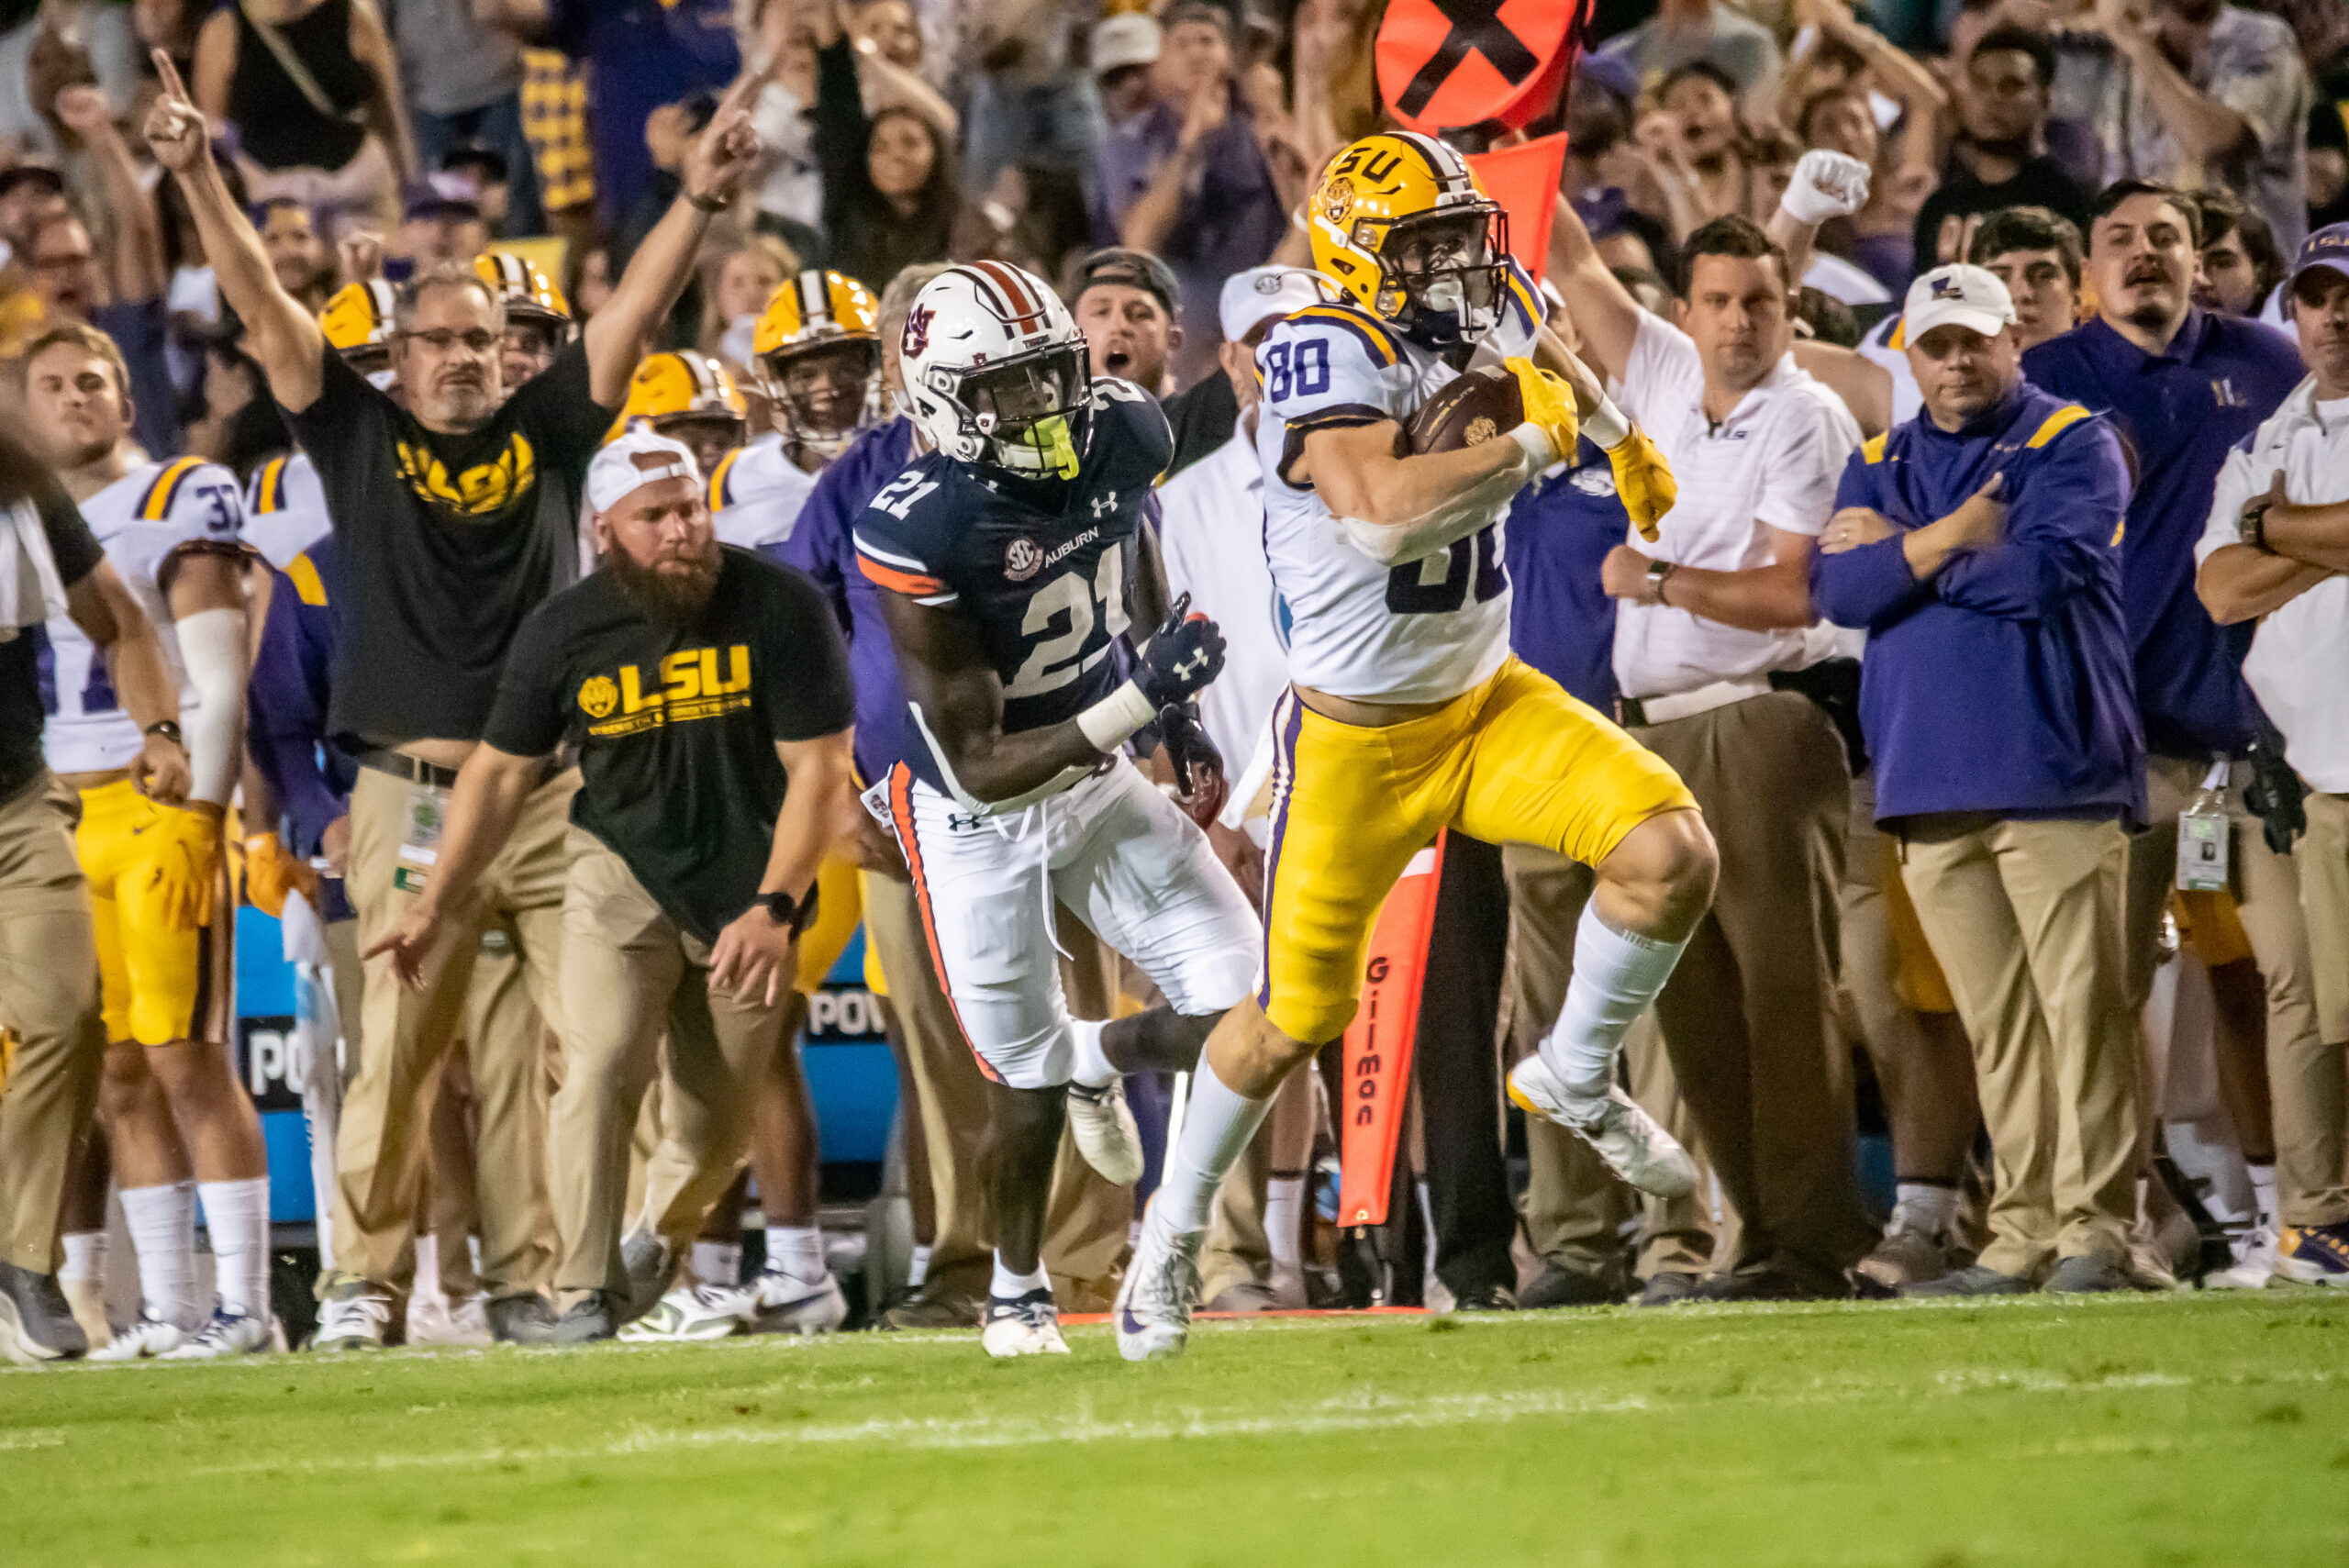 NOT THE STANDARD, BUT A WIN FOR LSU 27-14